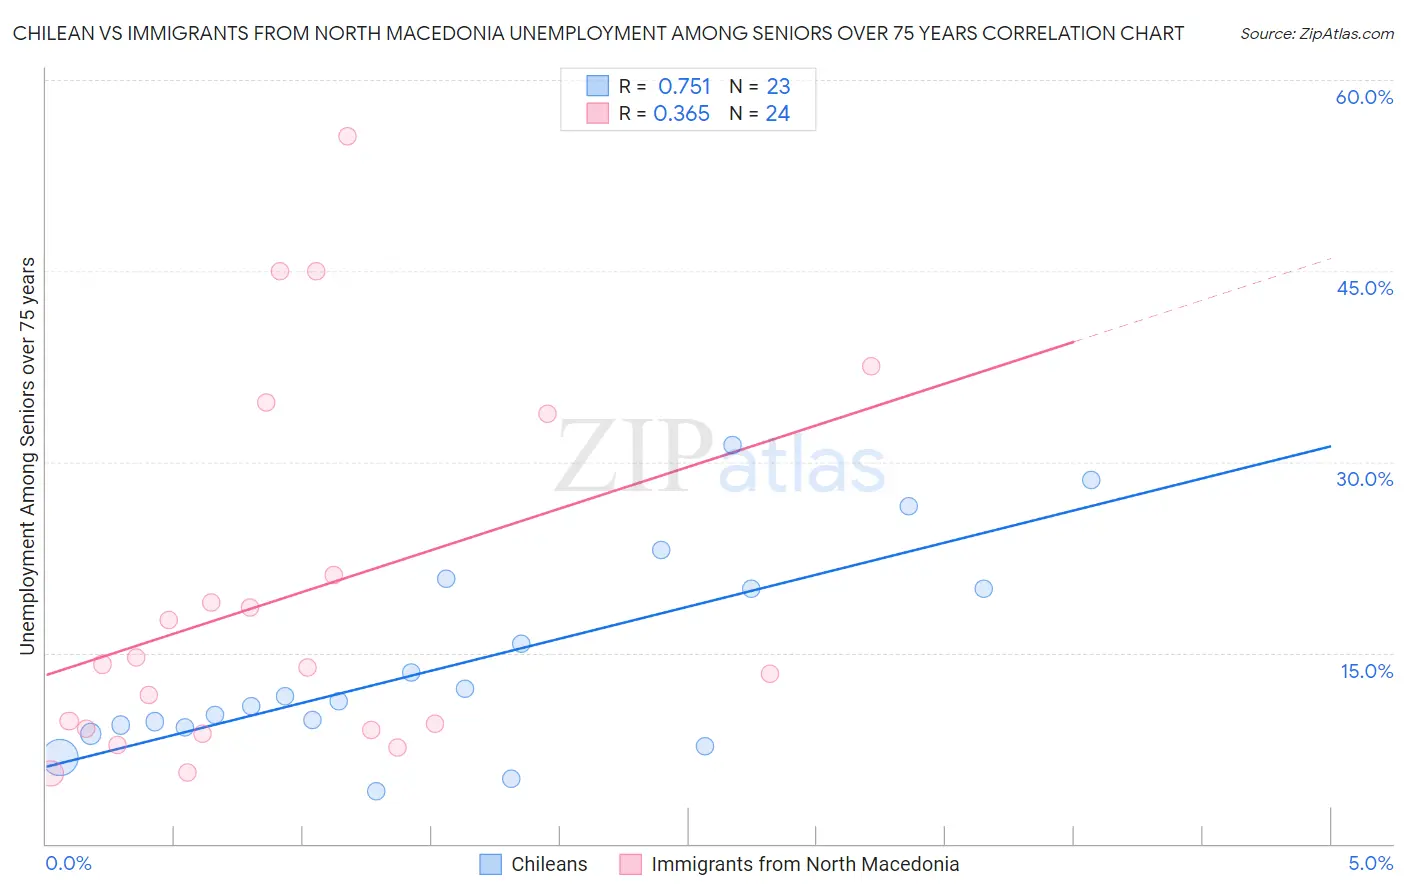 Chilean vs Immigrants from North Macedonia Unemployment Among Seniors over 75 years